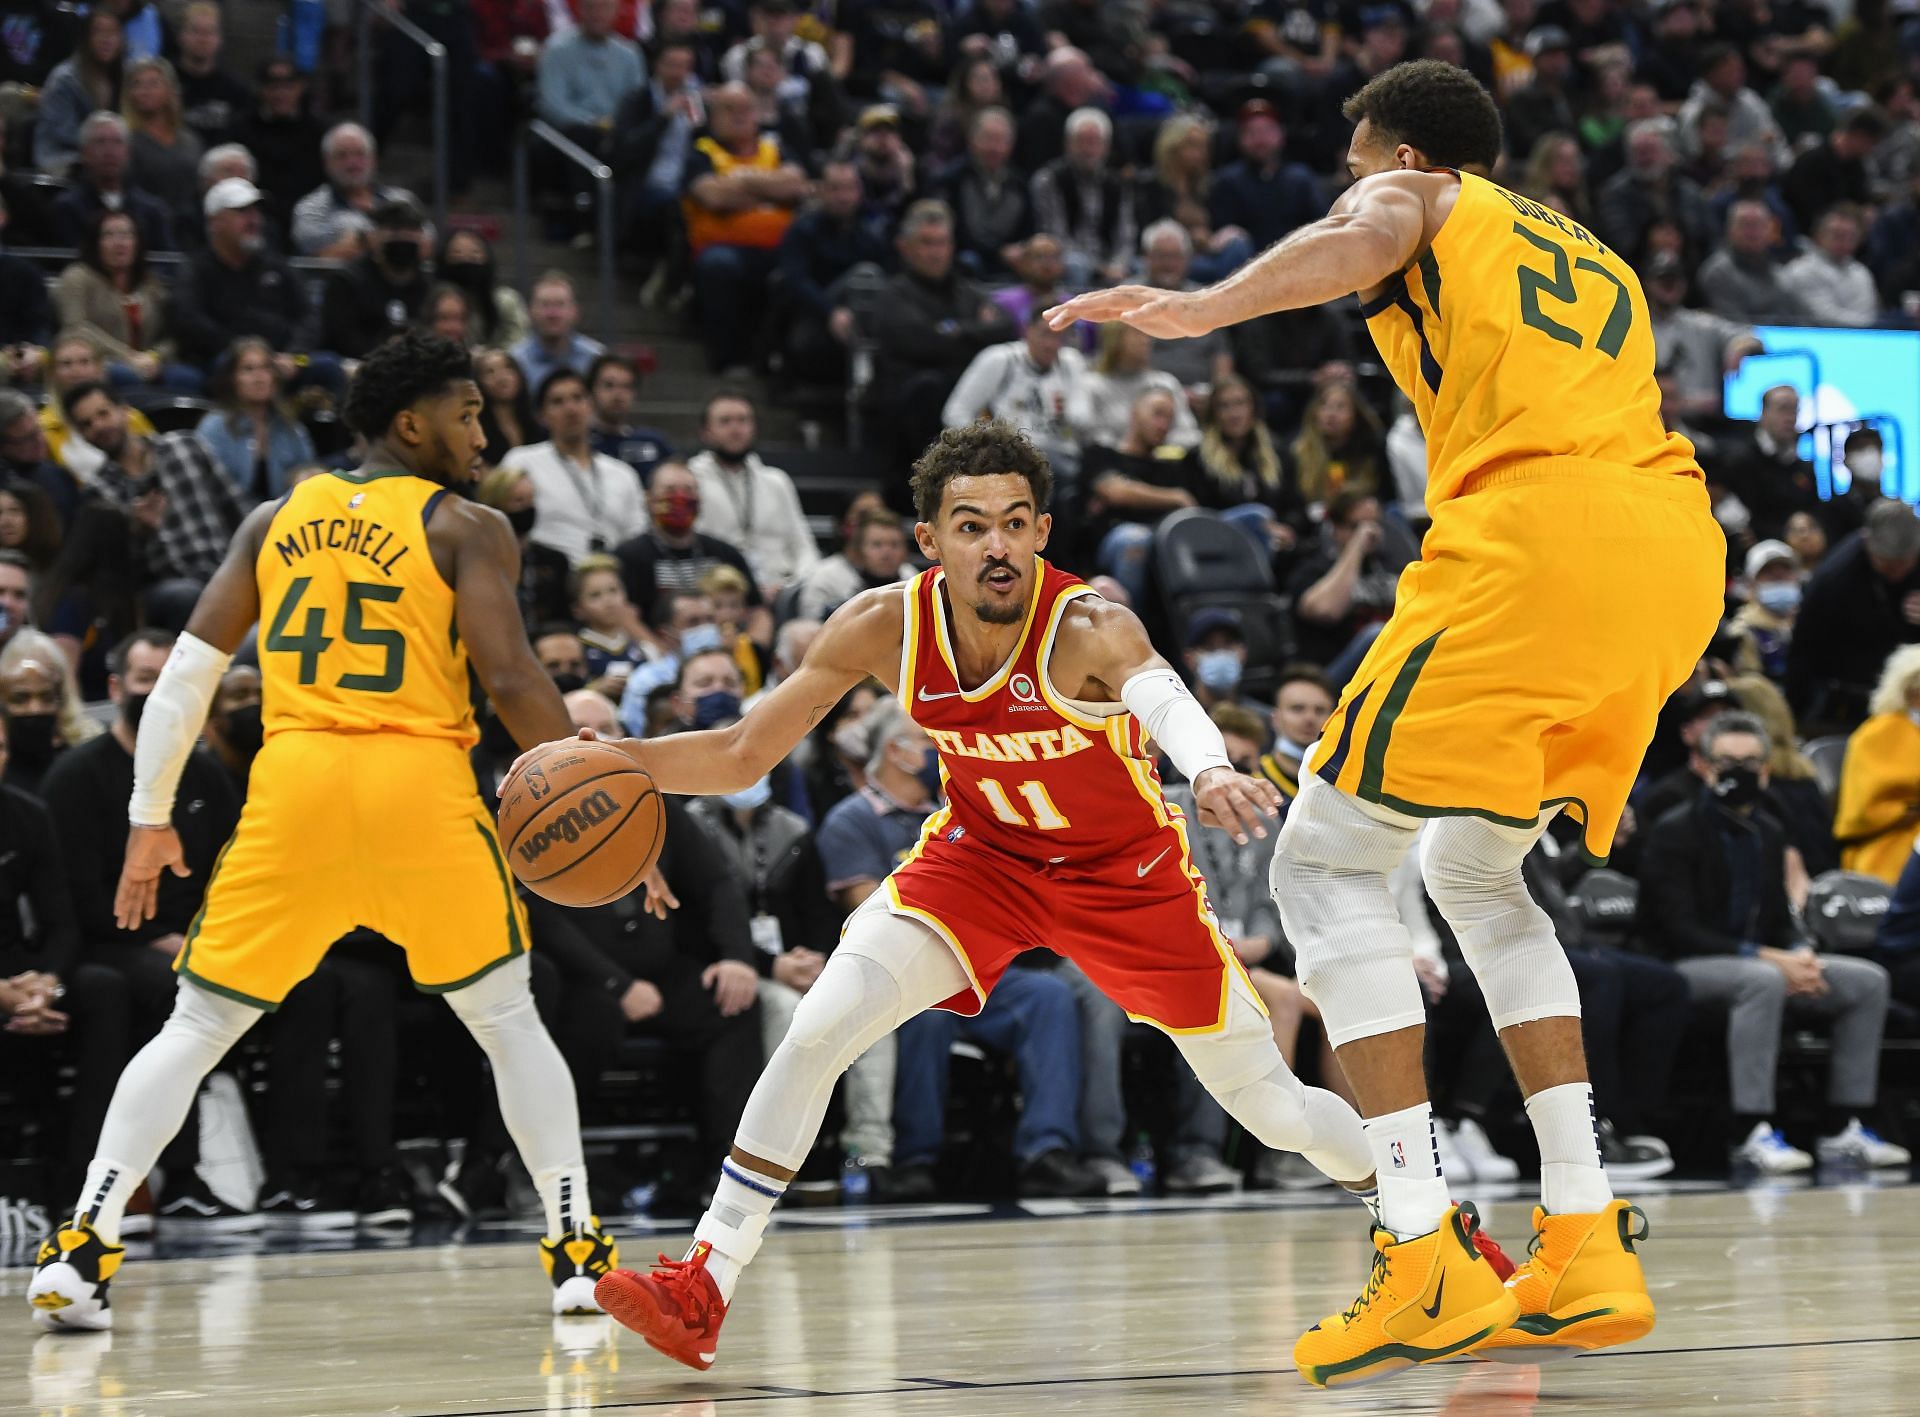 The Utah Jazz have lost their defensive identity in their current slump.